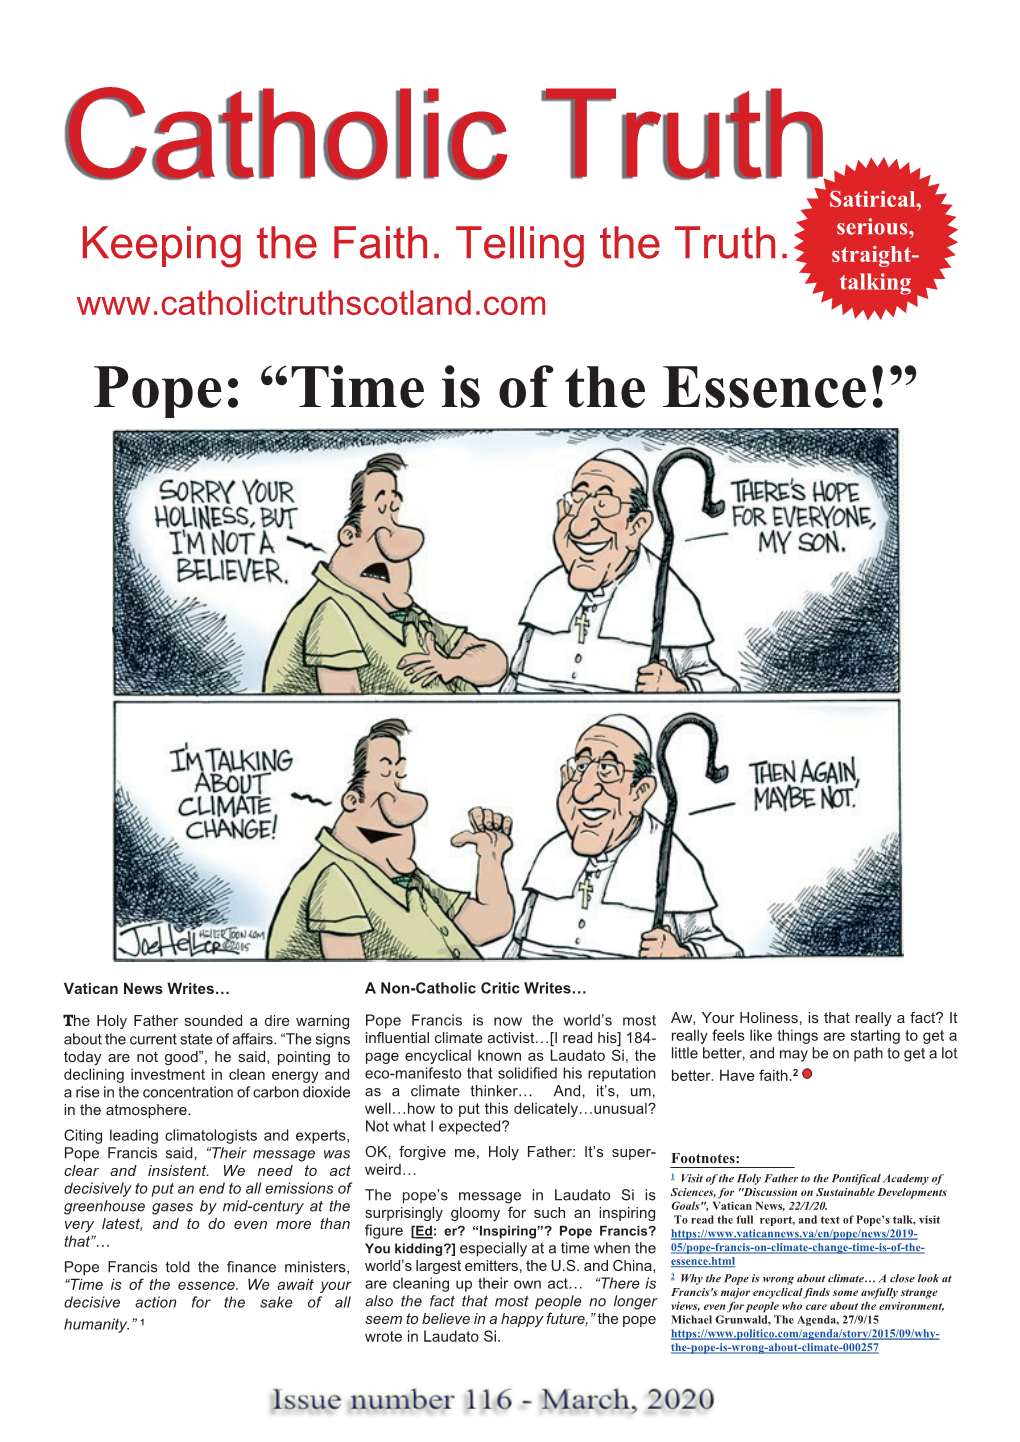 Pope: “Time Is of the Essence!”